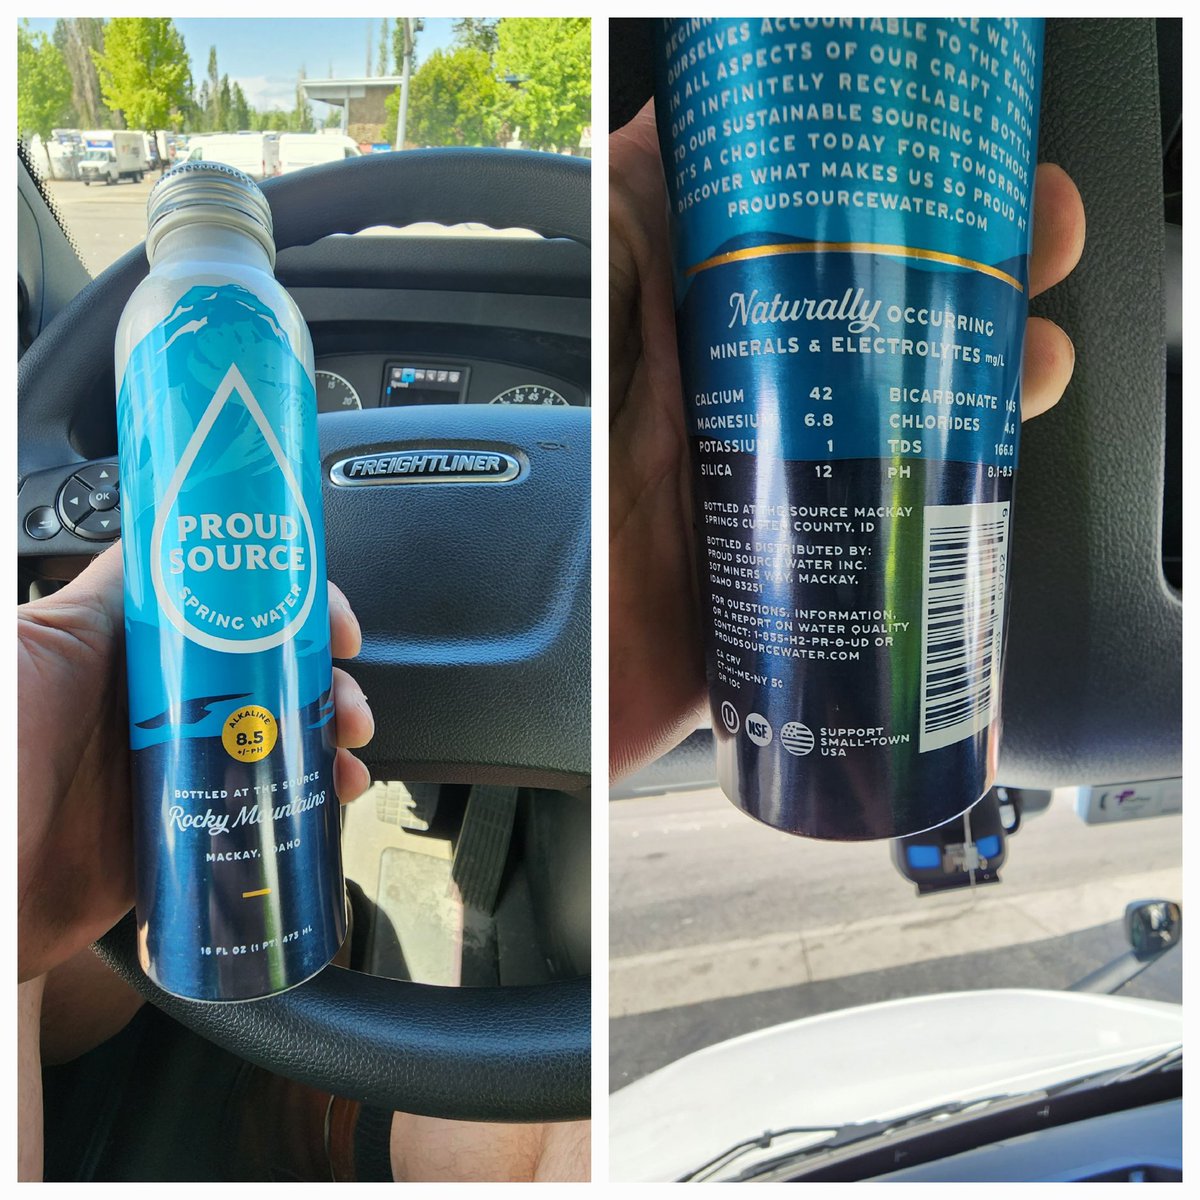 @MarkBski in my rush to get out of the house this morning I forgot my water bottle.
Stopped at a truck stop in Kent and they had this new #Sparklingwater from Proud Source Water. Love the fact they put the mineral content on the back of the can.